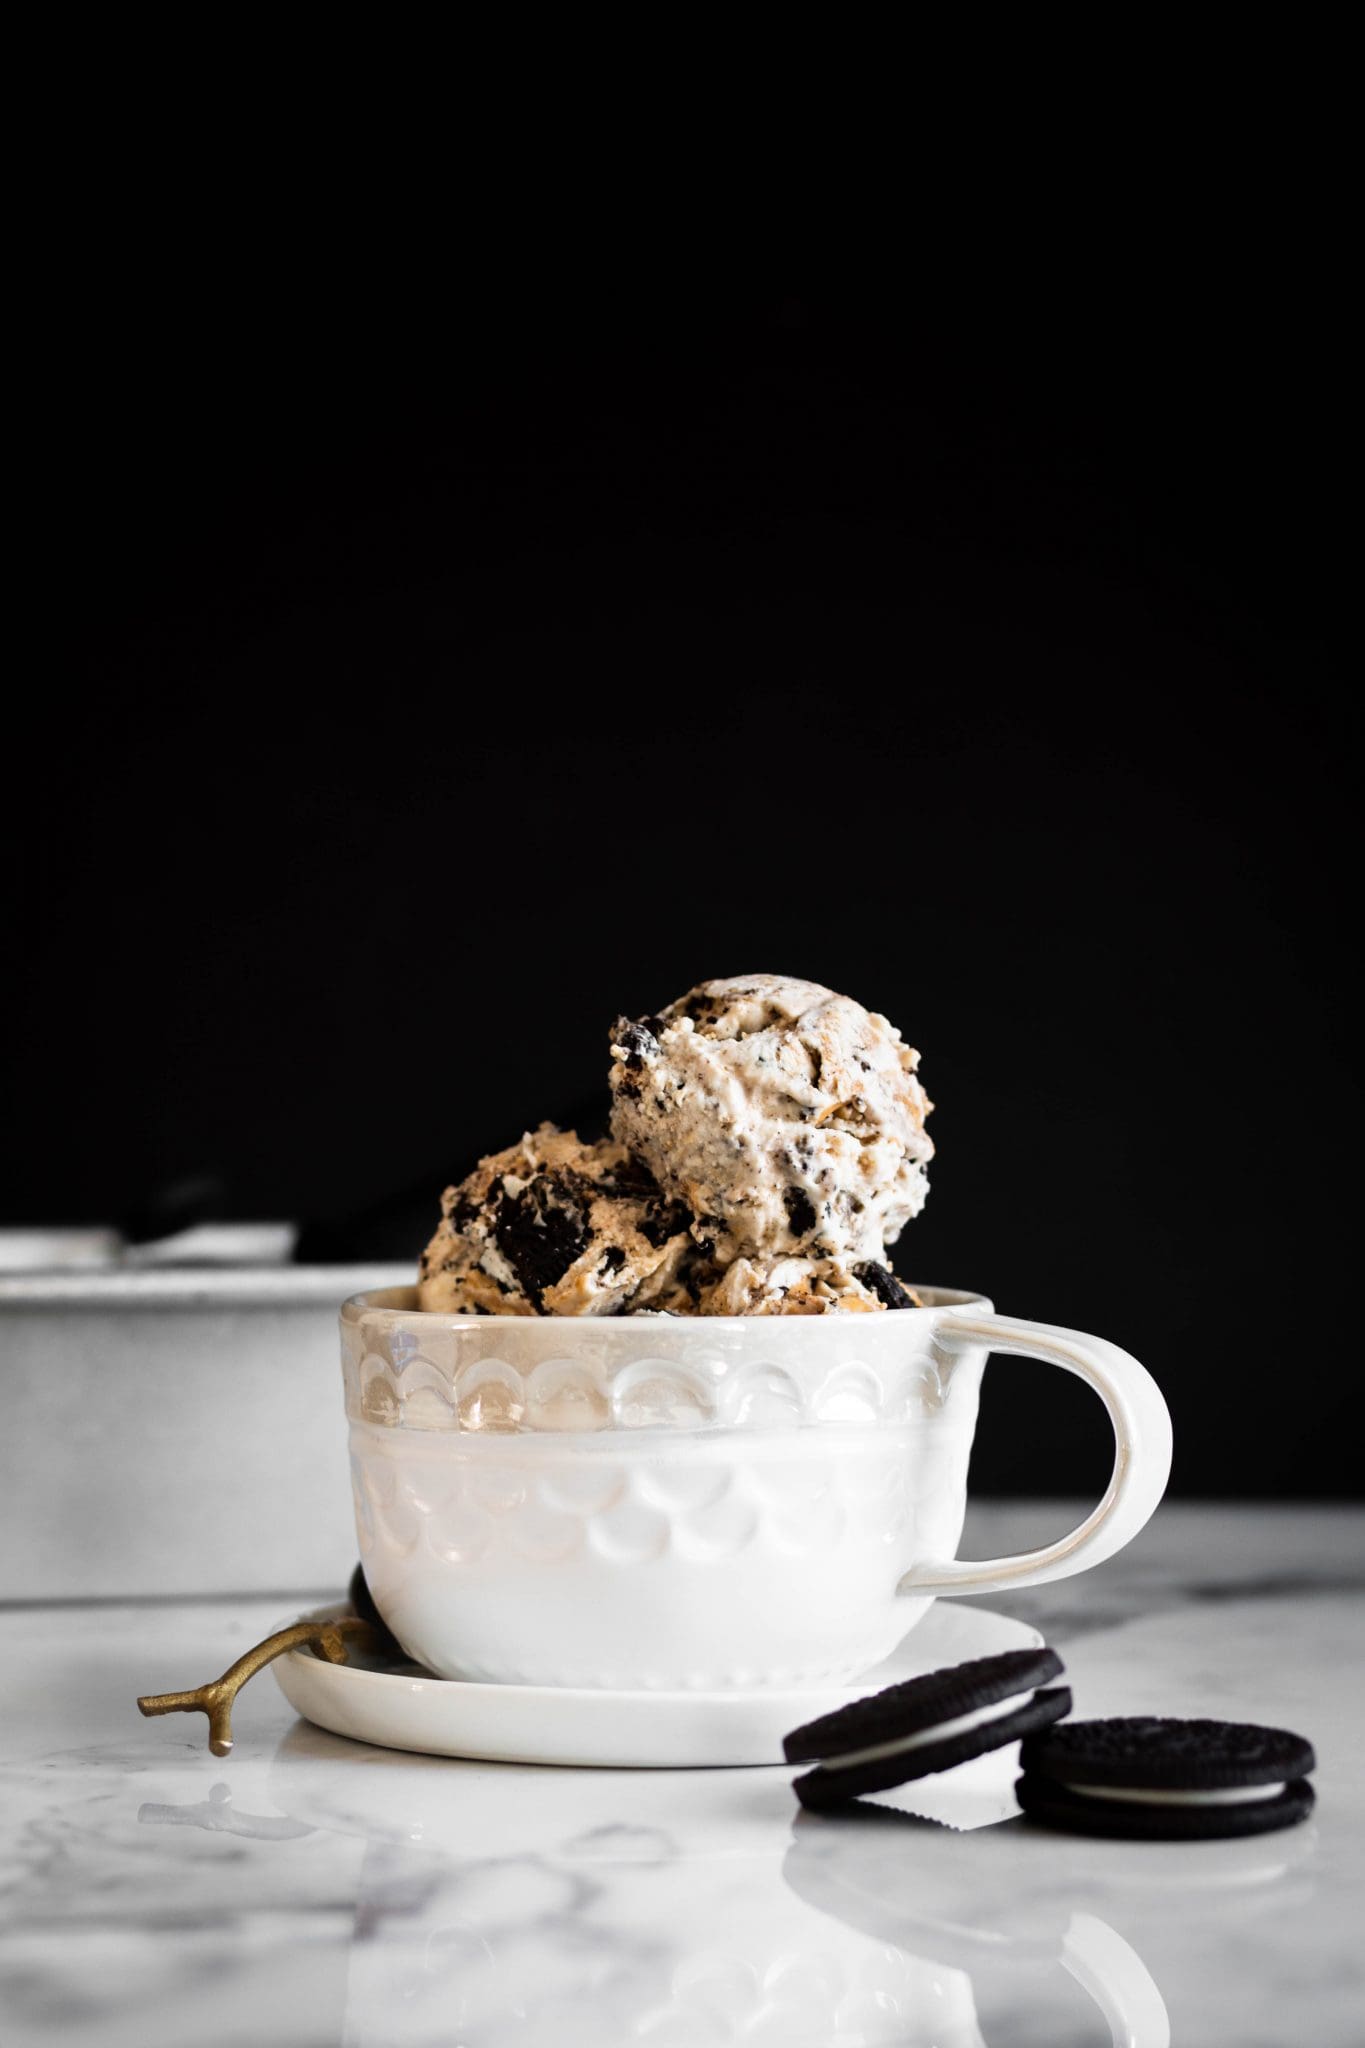 vegan cookies and peanut butter ice cream scoops in a cup from the side